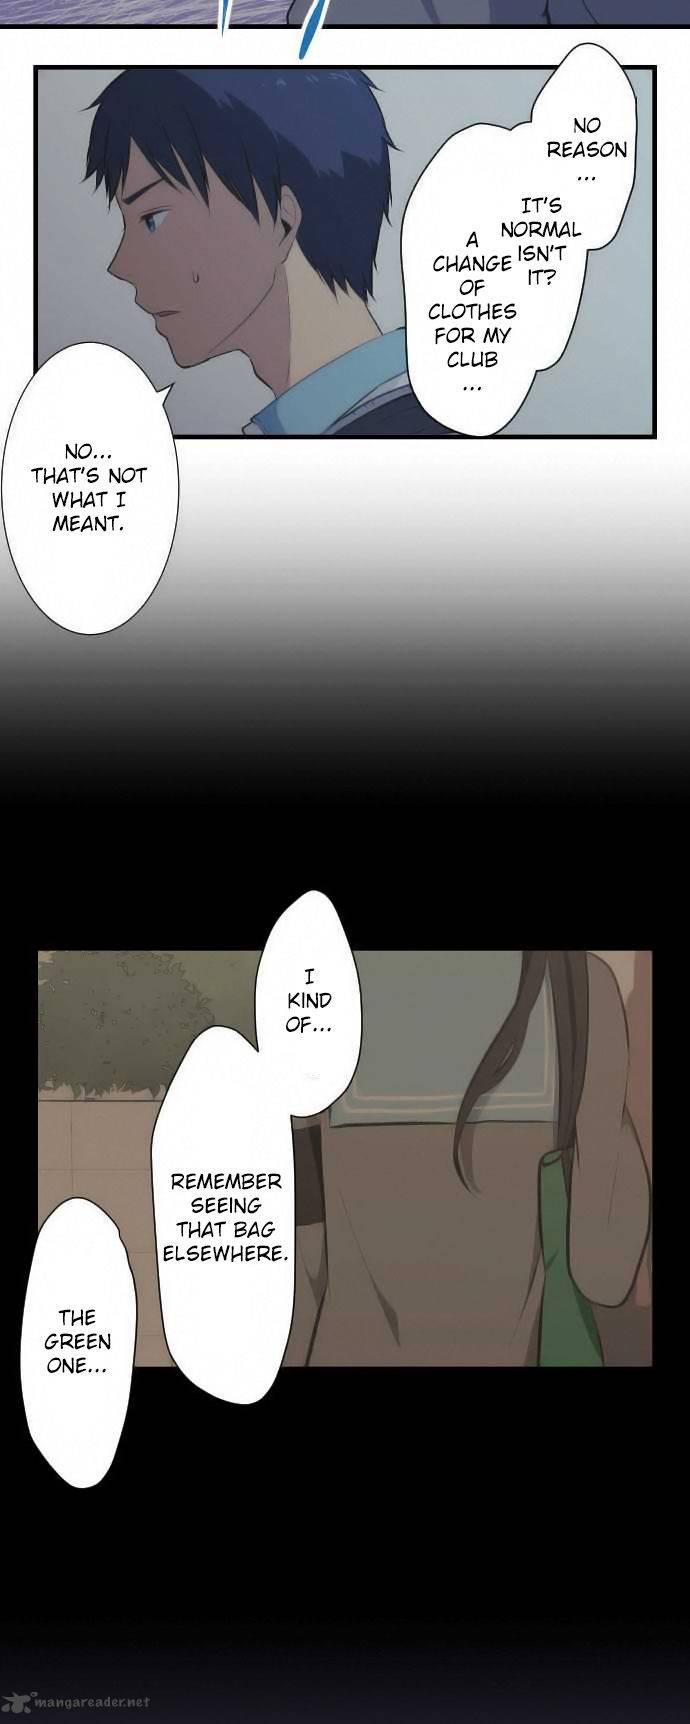 Relife 37 9